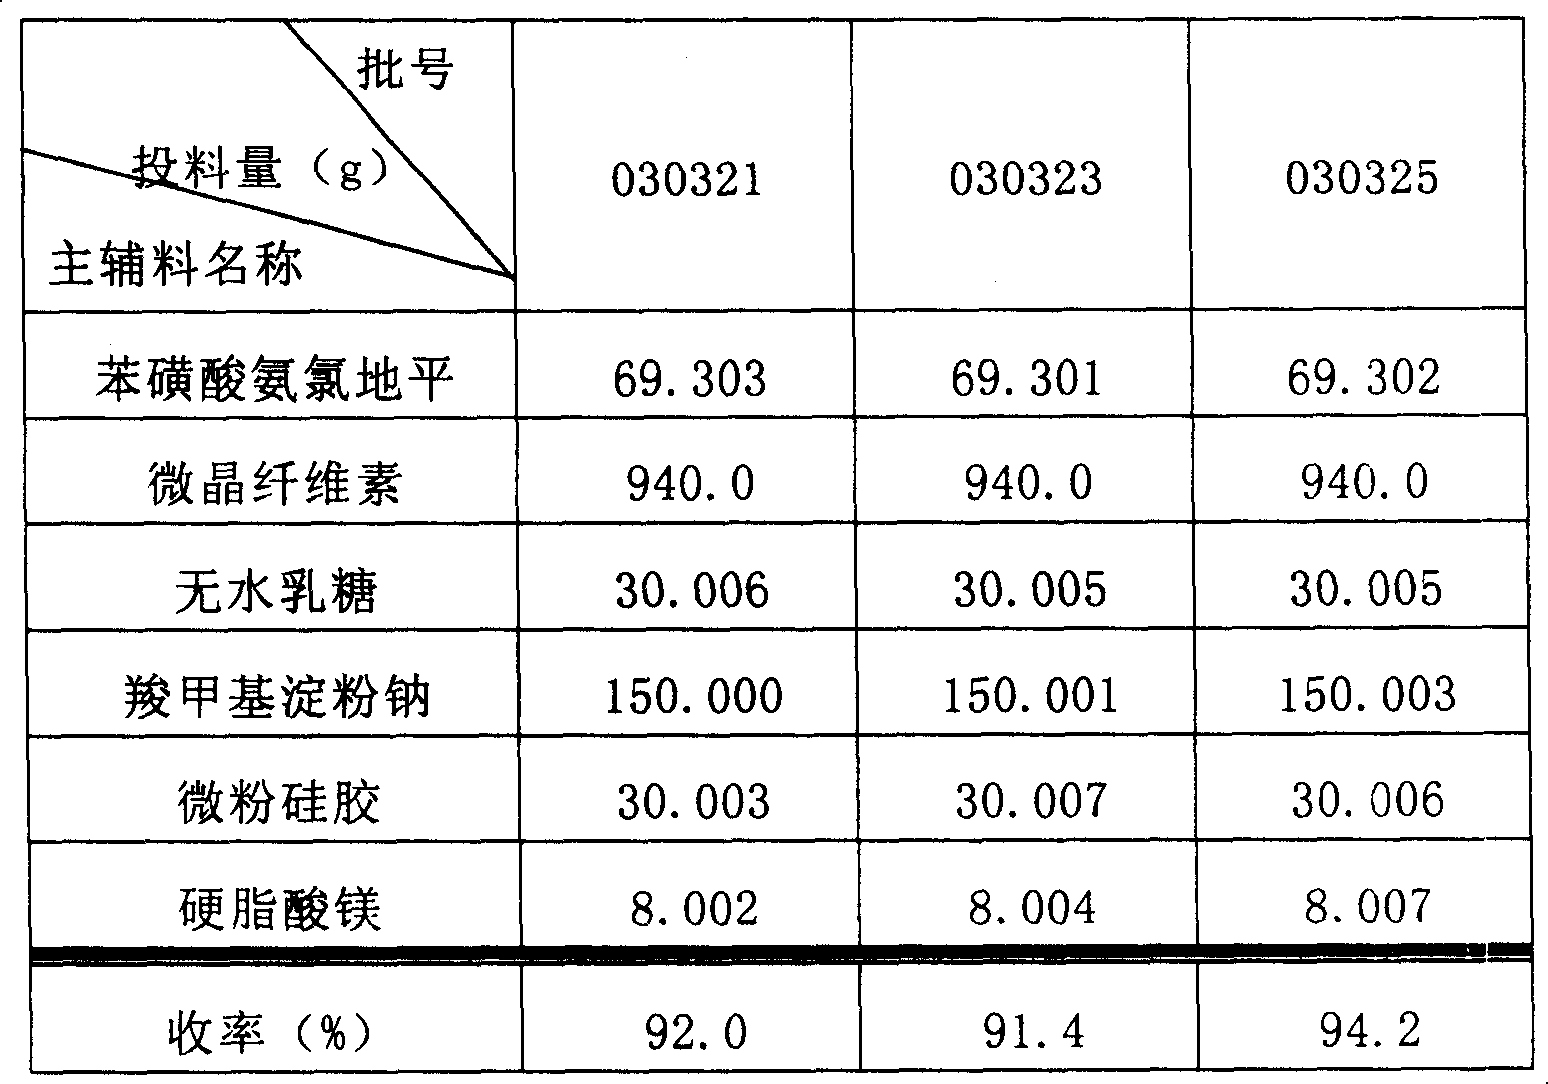 Phenylsulfonic acid amido chloro diping dispersion tablet and its preparation method